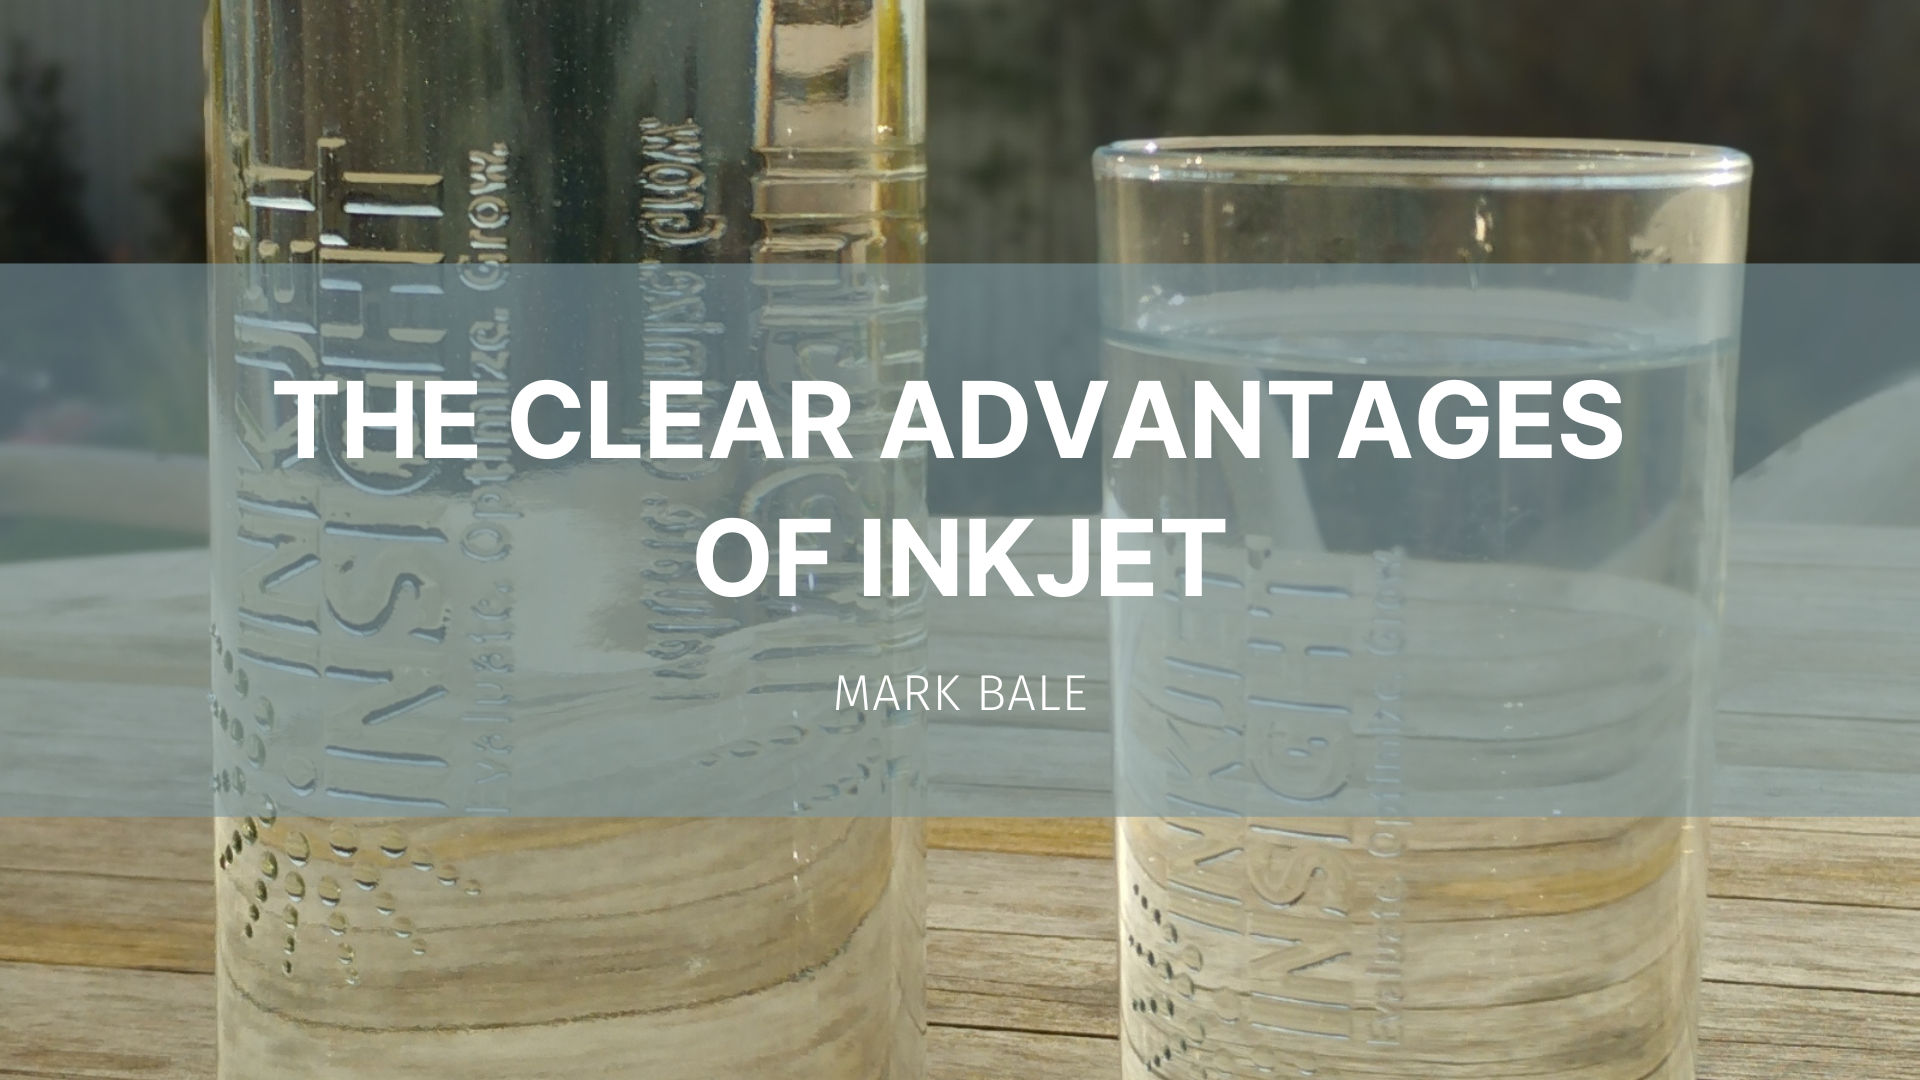 Featured image for “The clear advantages of inkjet”